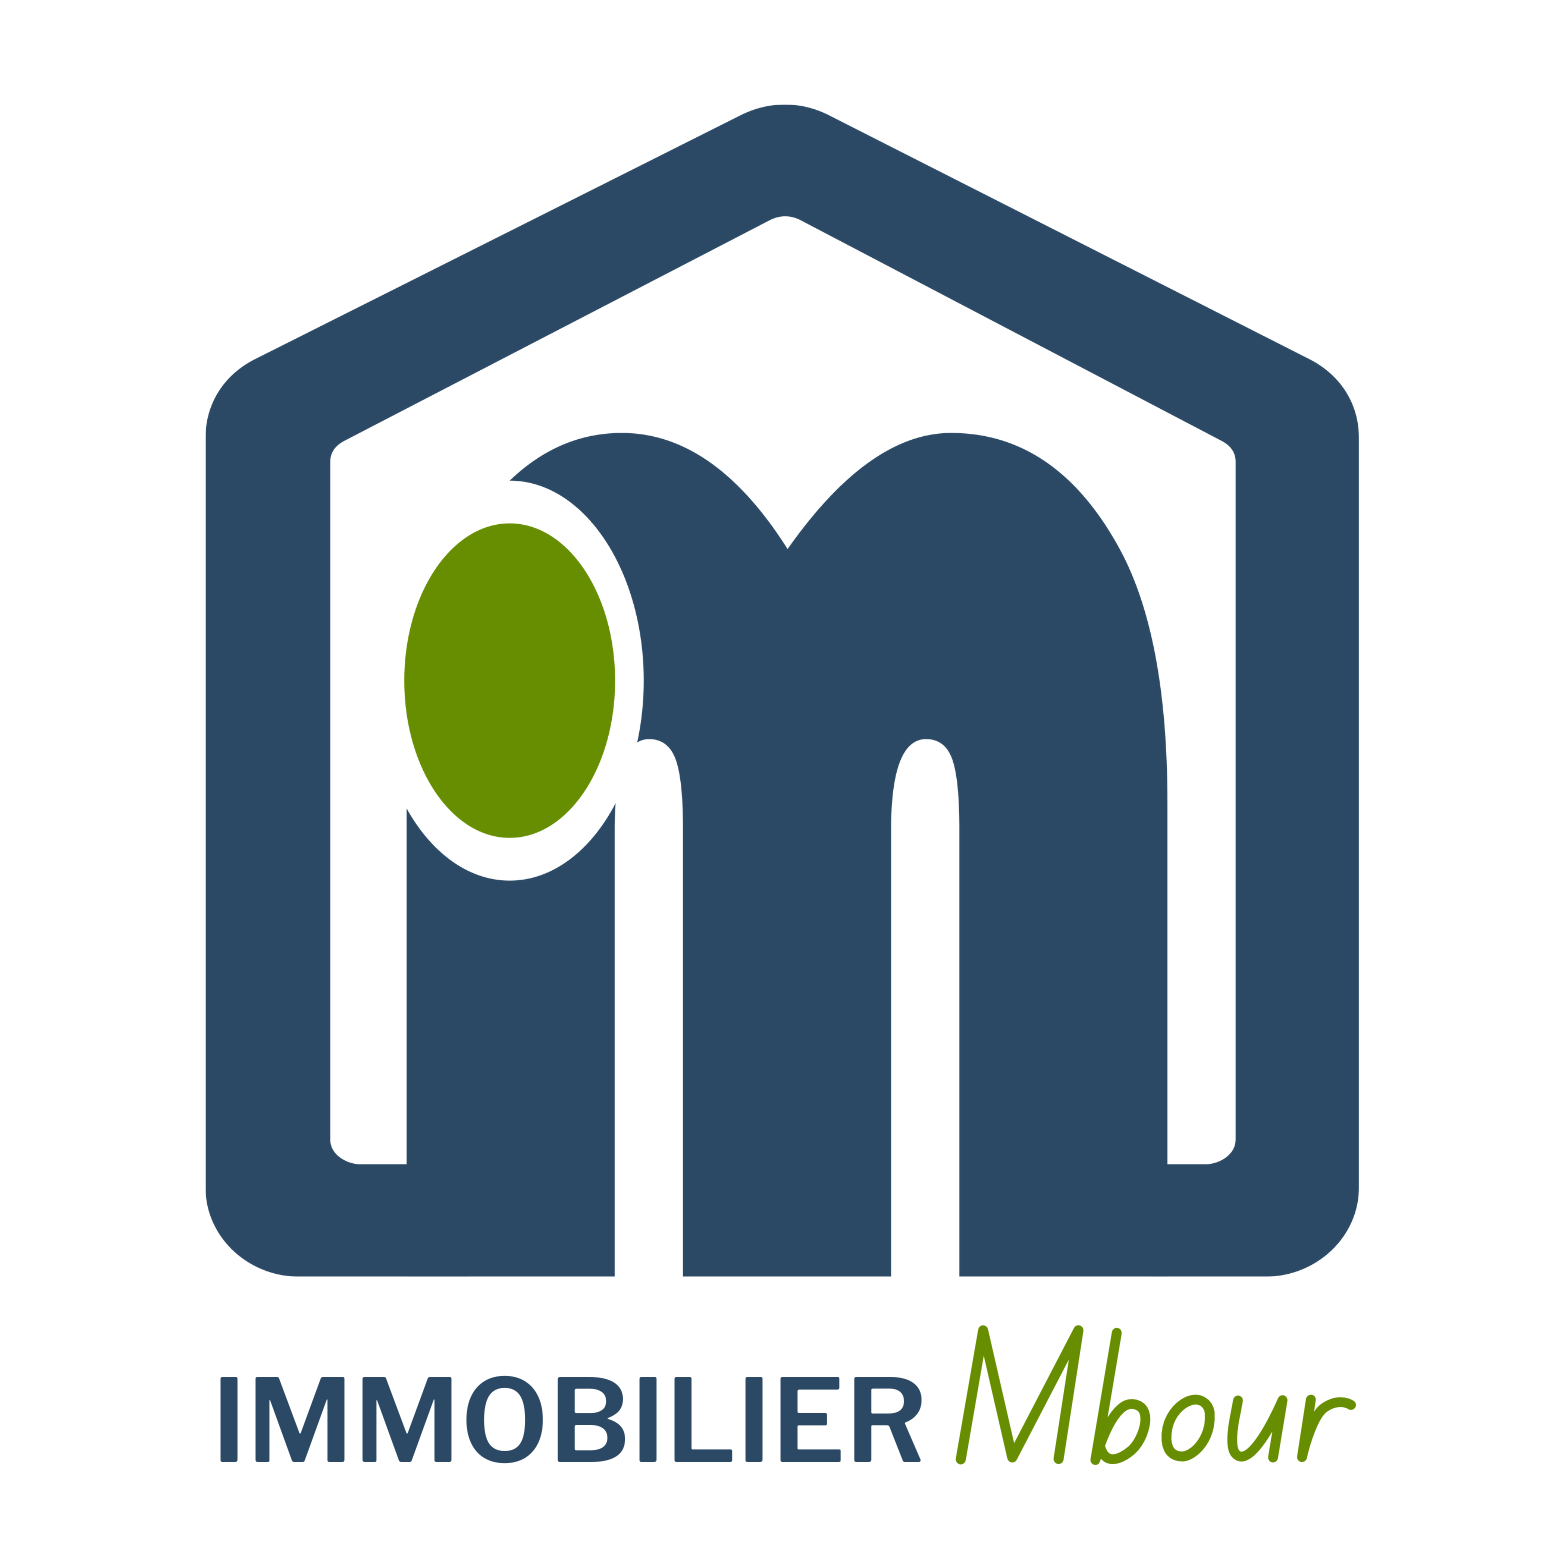 IMMOBILIER MBOUR